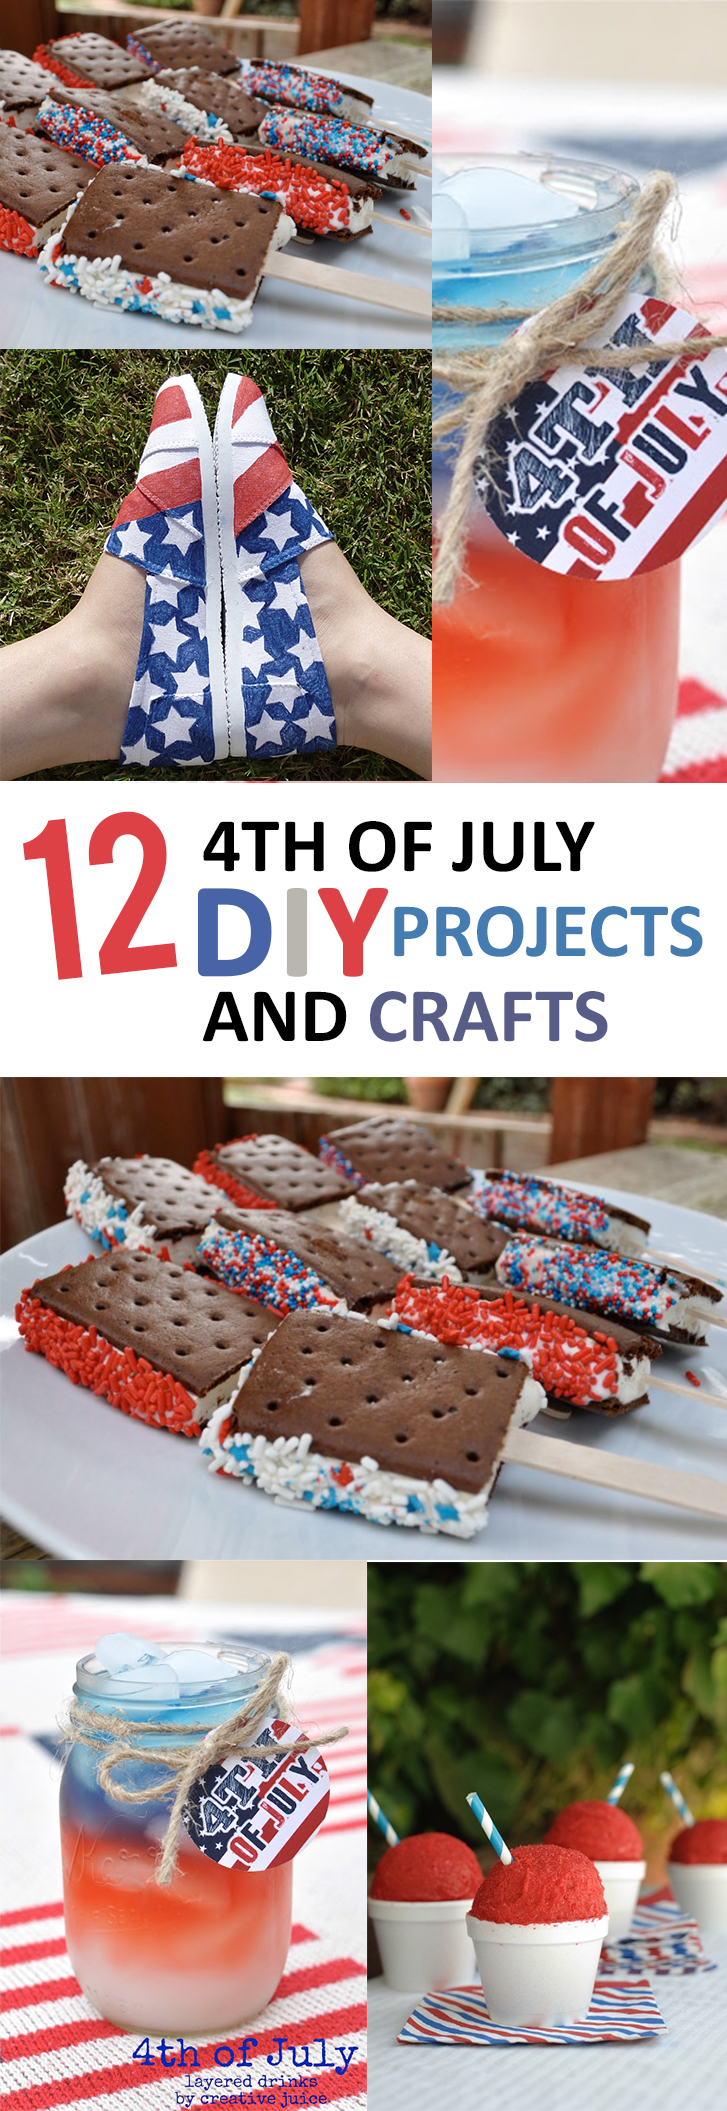 12 4th of July DIY Projects and Crafts